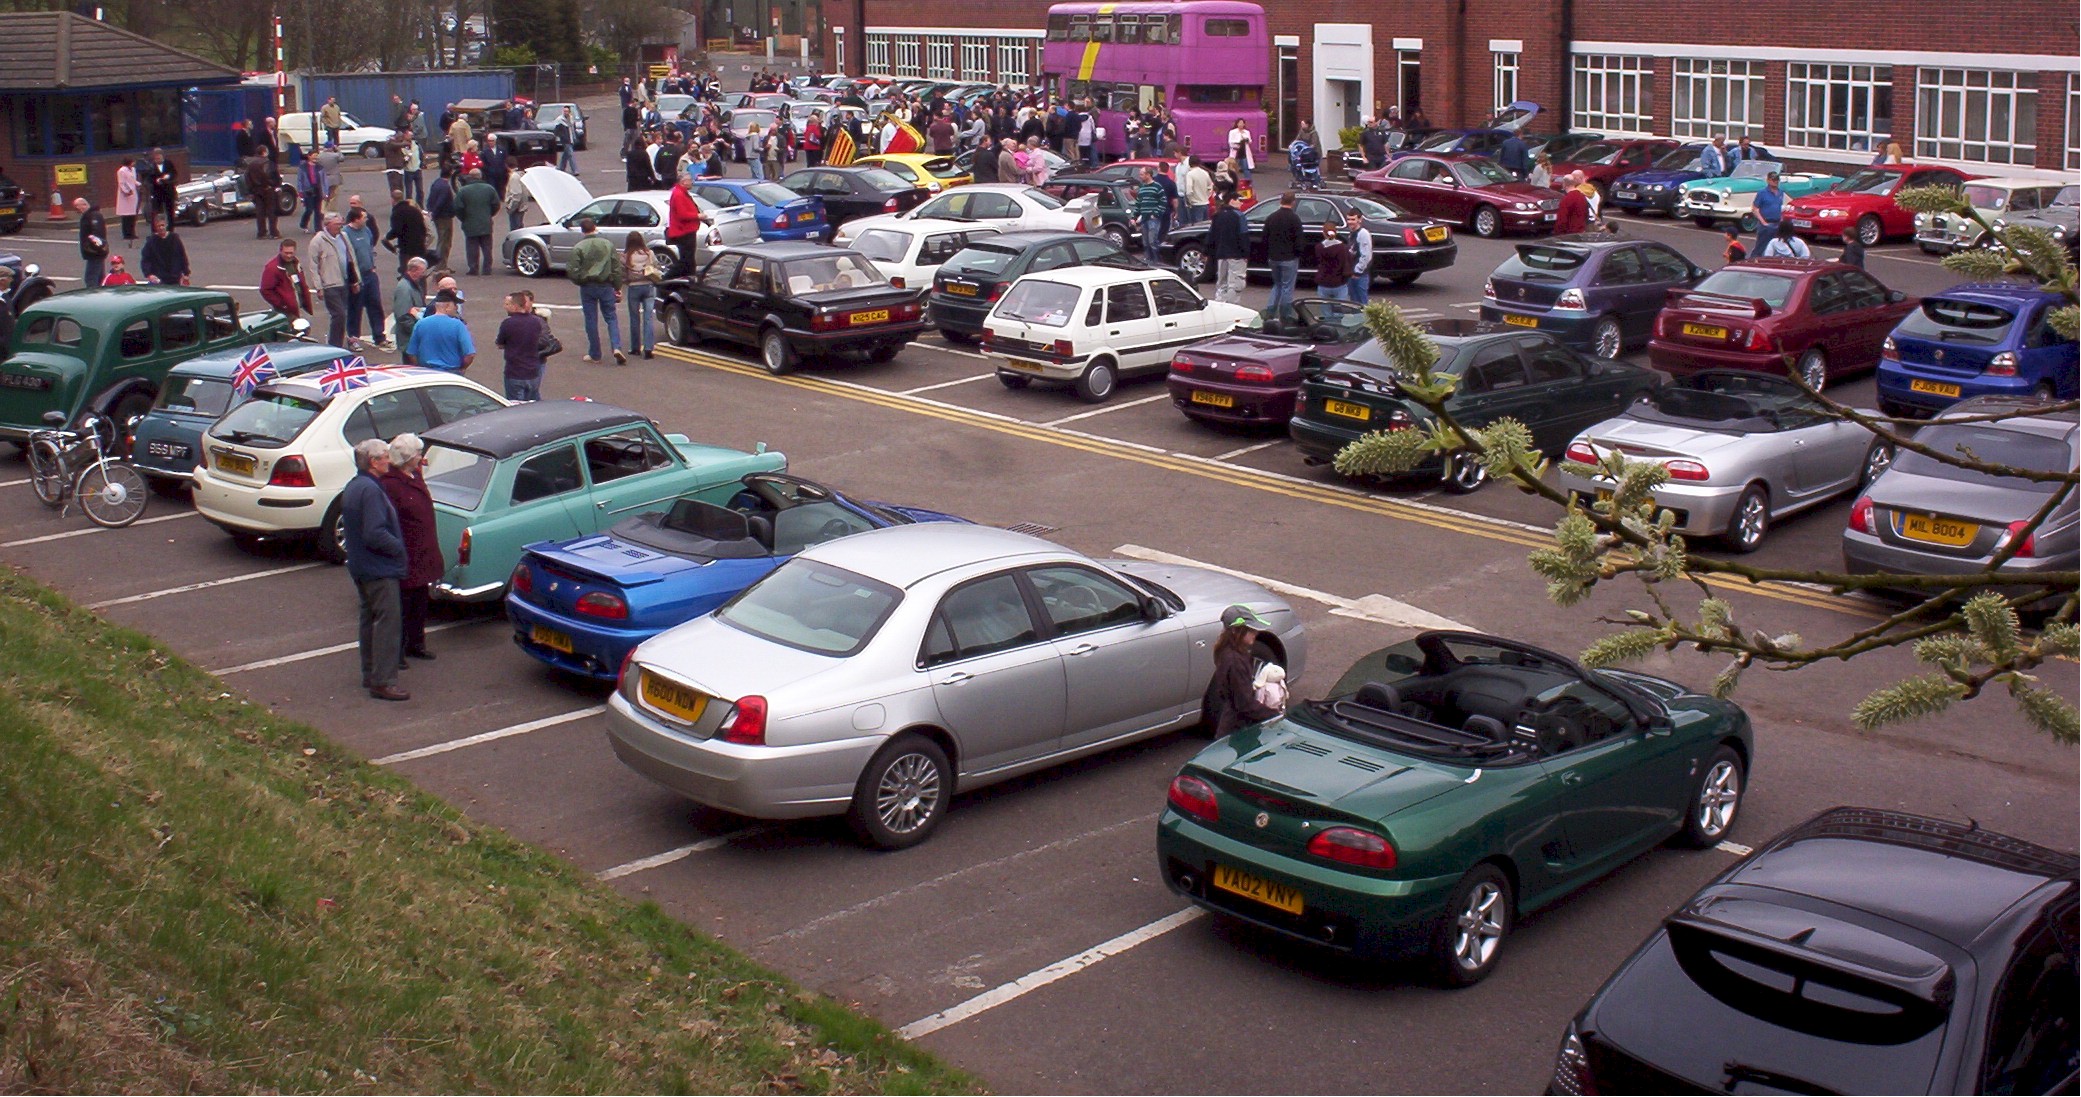 a view of the carpark. Had to expand the available area to get them all in.